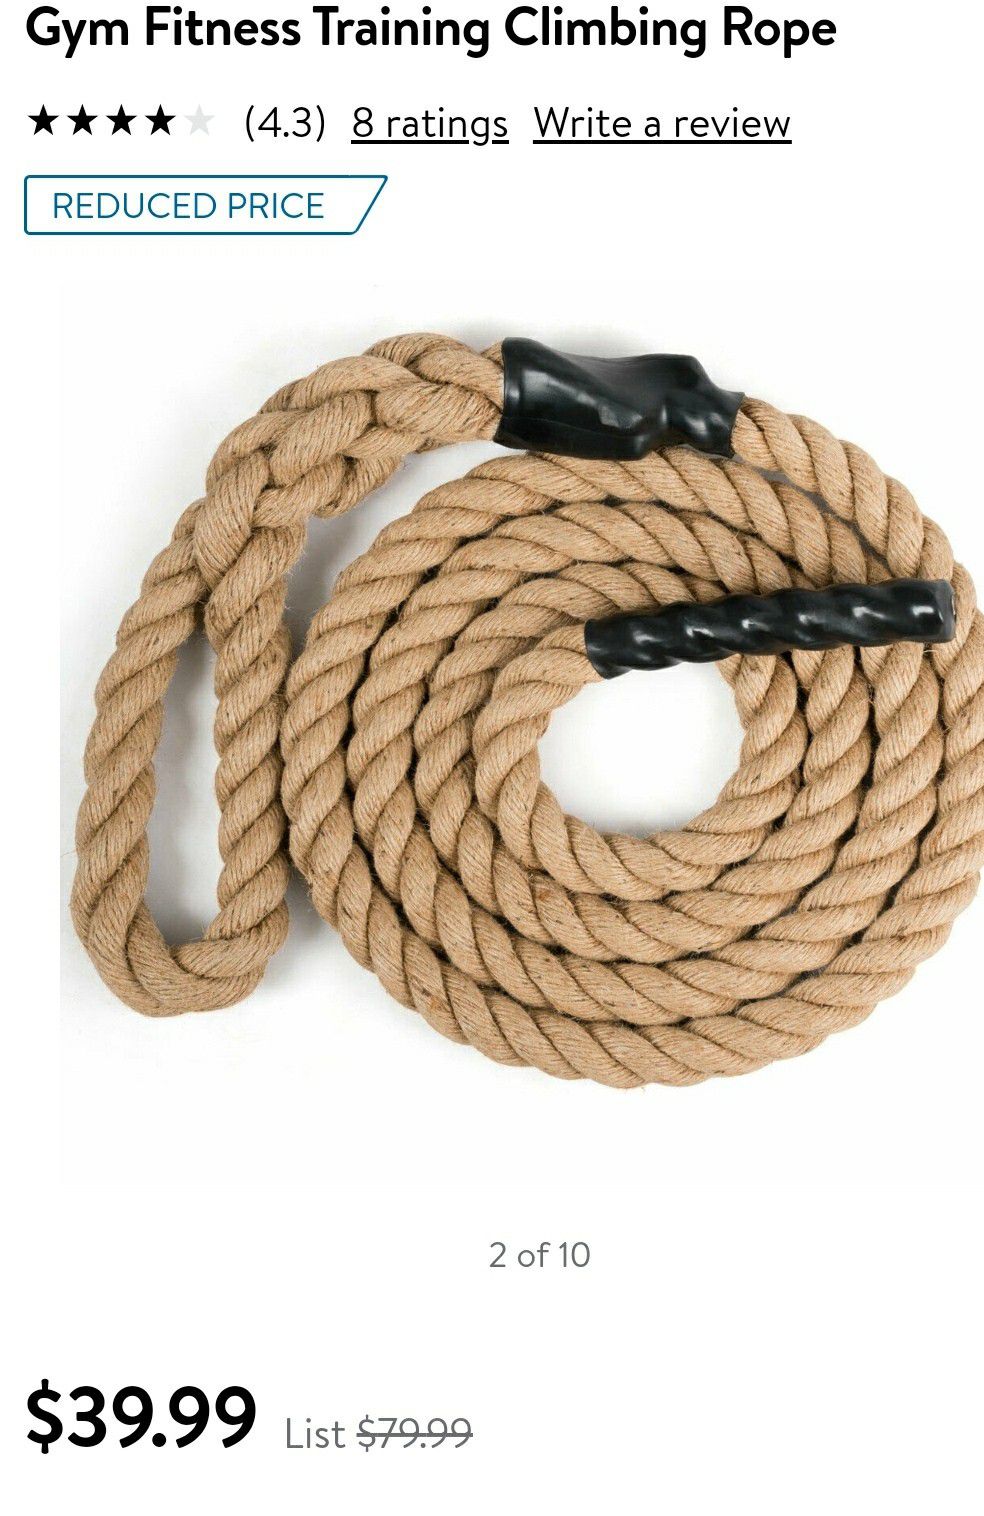 Gym fitness rope